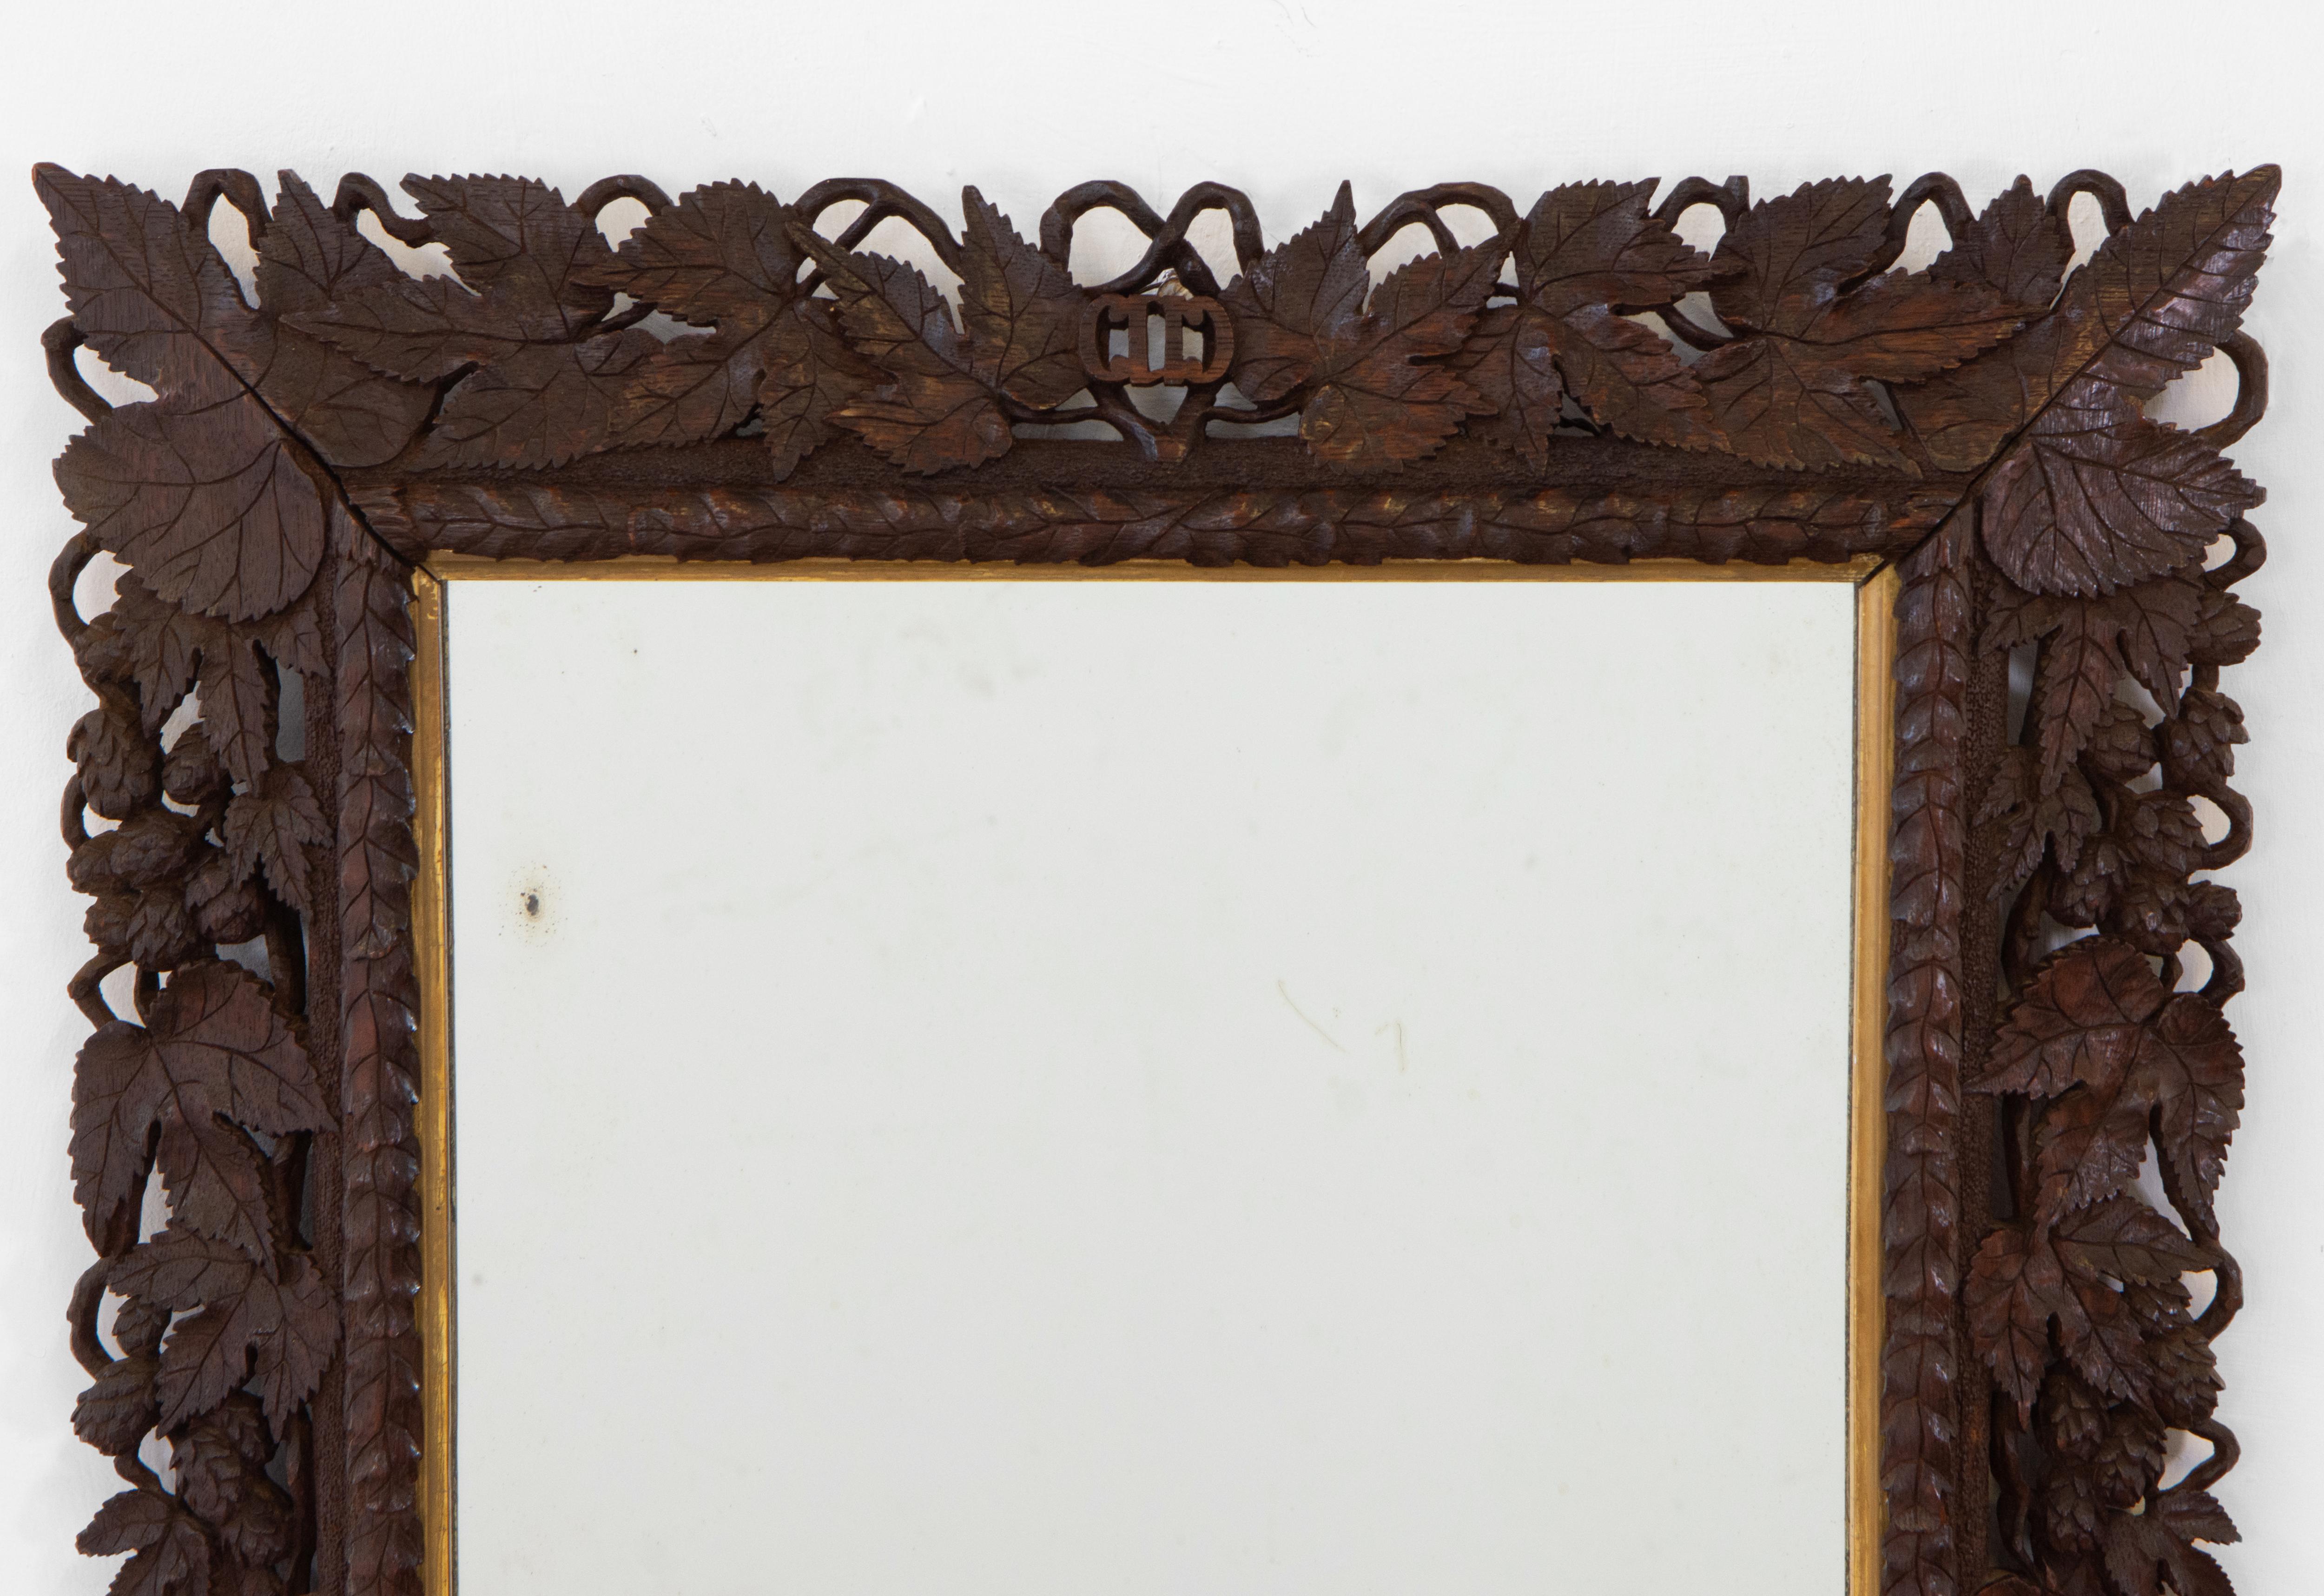 Early 20th century beautifully detailed hand-carved oak Black Forest wall mirror, adorned with grapevines and leaves, and with a gilt wood inset. Circa 1910.

The mirror plate appears to be original, and has some blemishes with age. Pine beading has